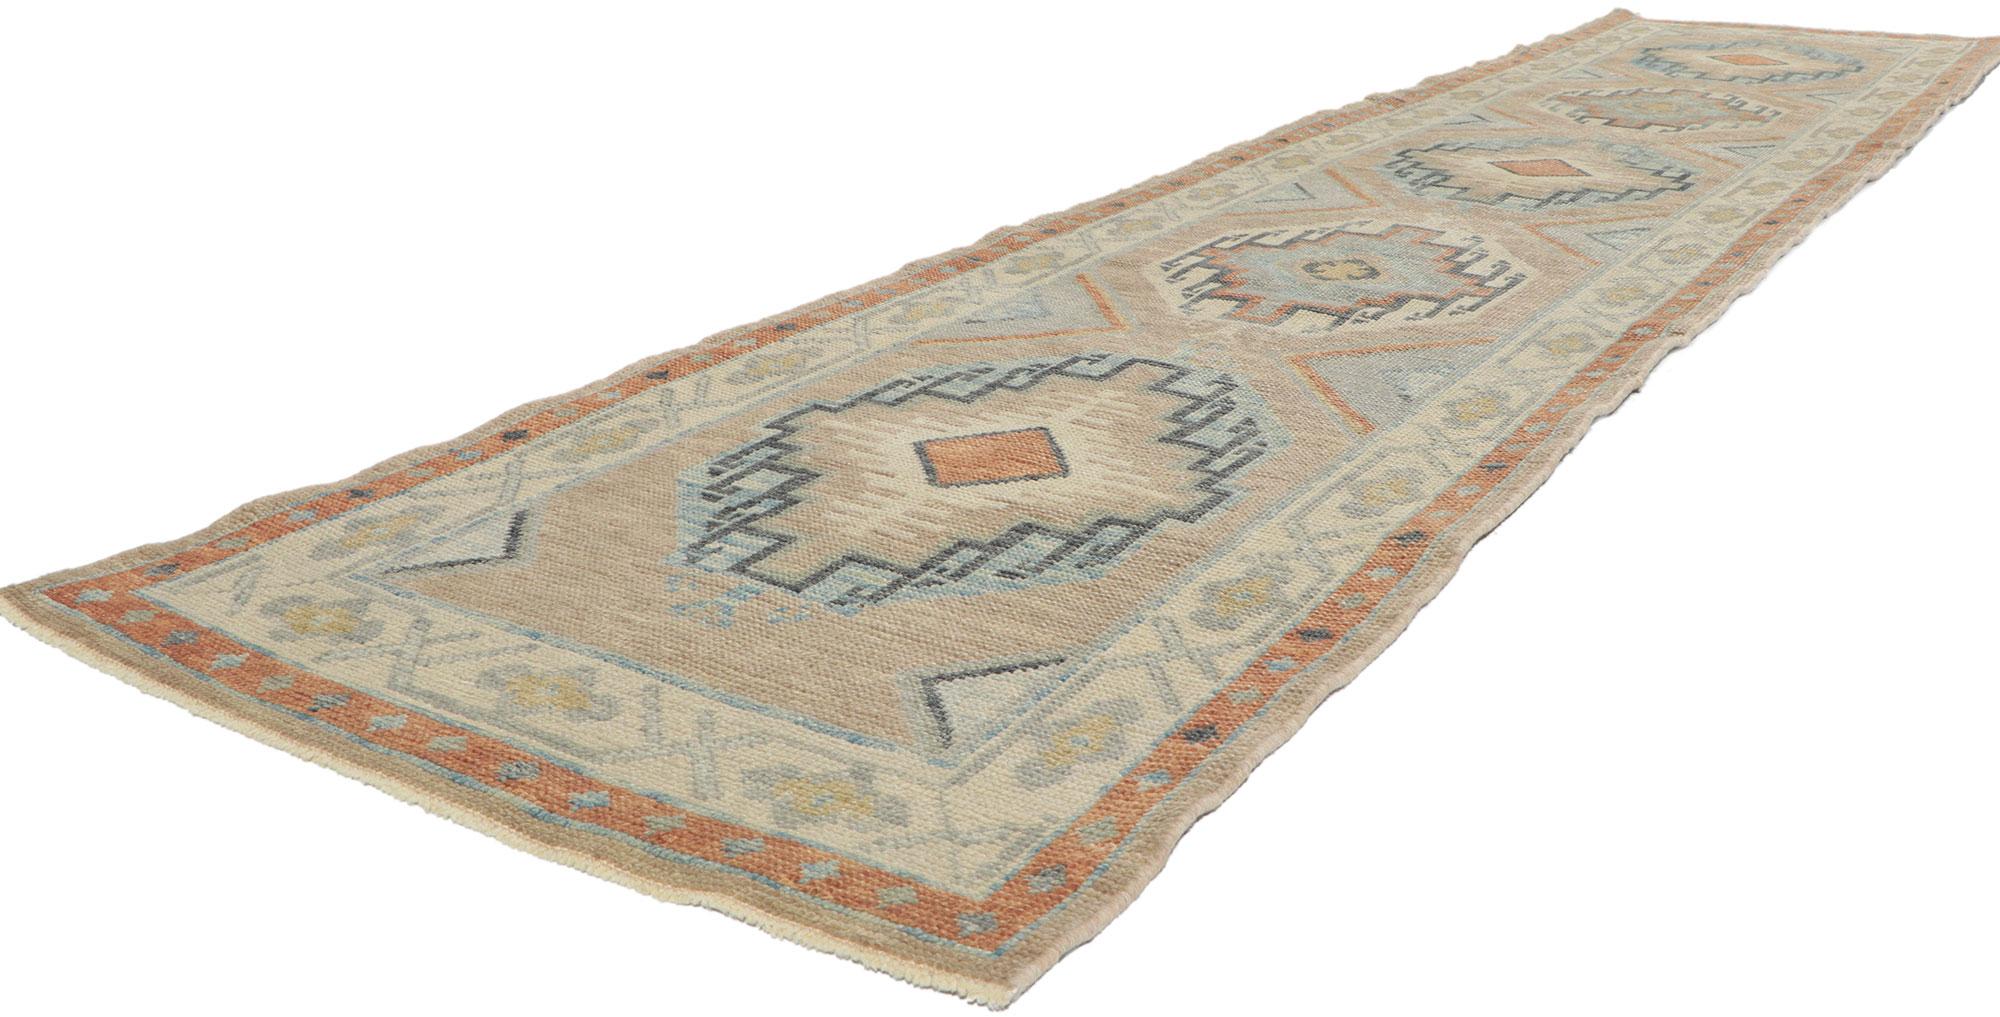 53806 New Turkish Oushak Runner with Modern Hacienda Style, 02'11 x 13'02. With its expressive tribal design, incredible detail and texture, this hand-knotted wool contemporary Turkish Oushak rug is a captivating vision of woven beauty. The abrashed